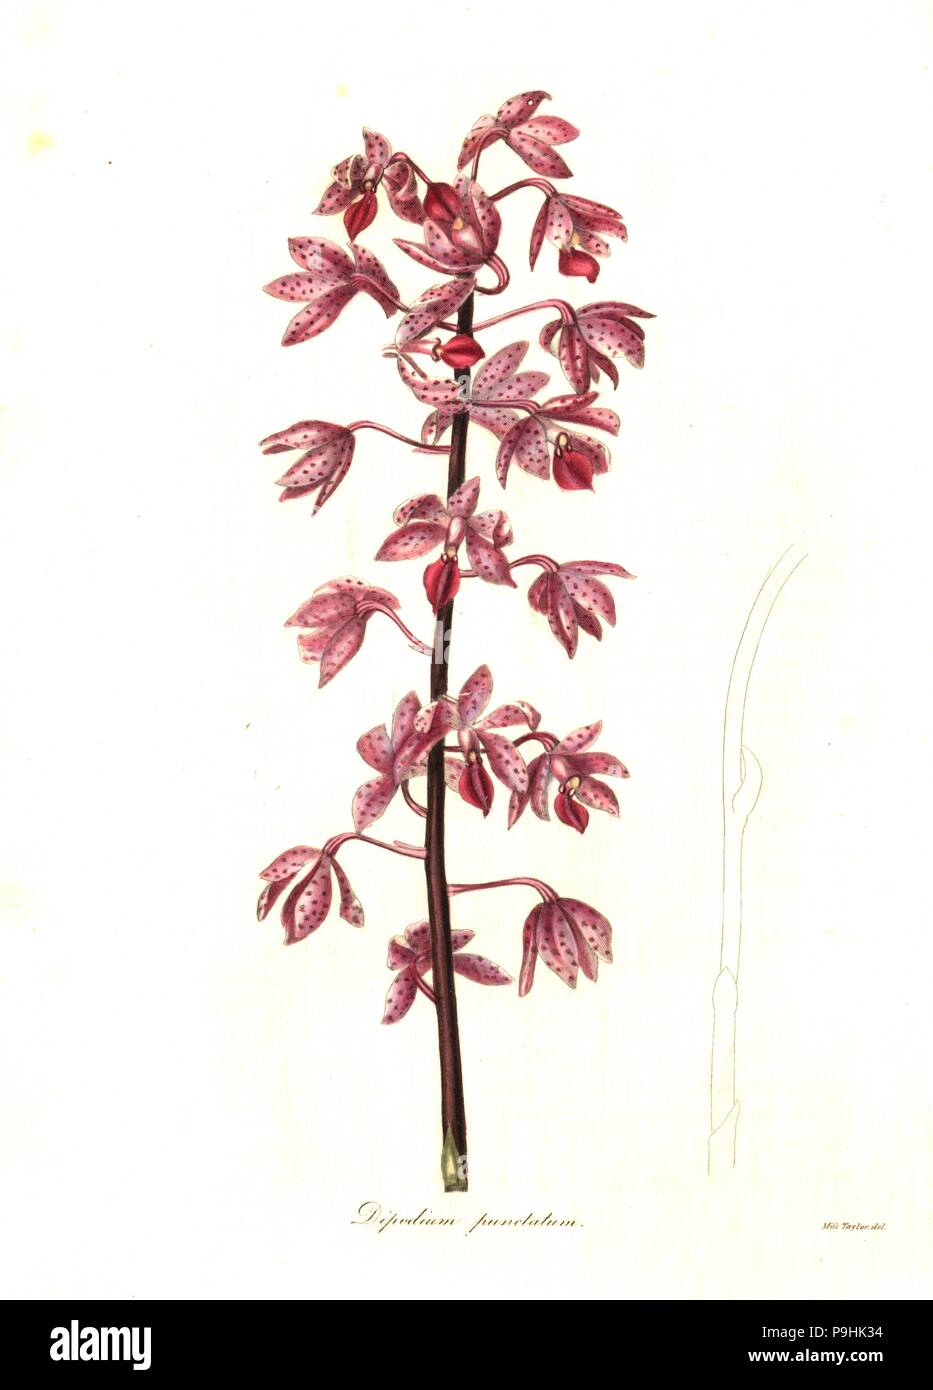 Dipodium squamatum orchid (Dotted dipodium, Dipodium punctatum). Handcoloured copperplate engraving after a botanical illustration by Miss Jane Taylor from Benjamin Maund and the Rev. John Stevens Henslow's The Botanist, London, 1836. Stock Photo